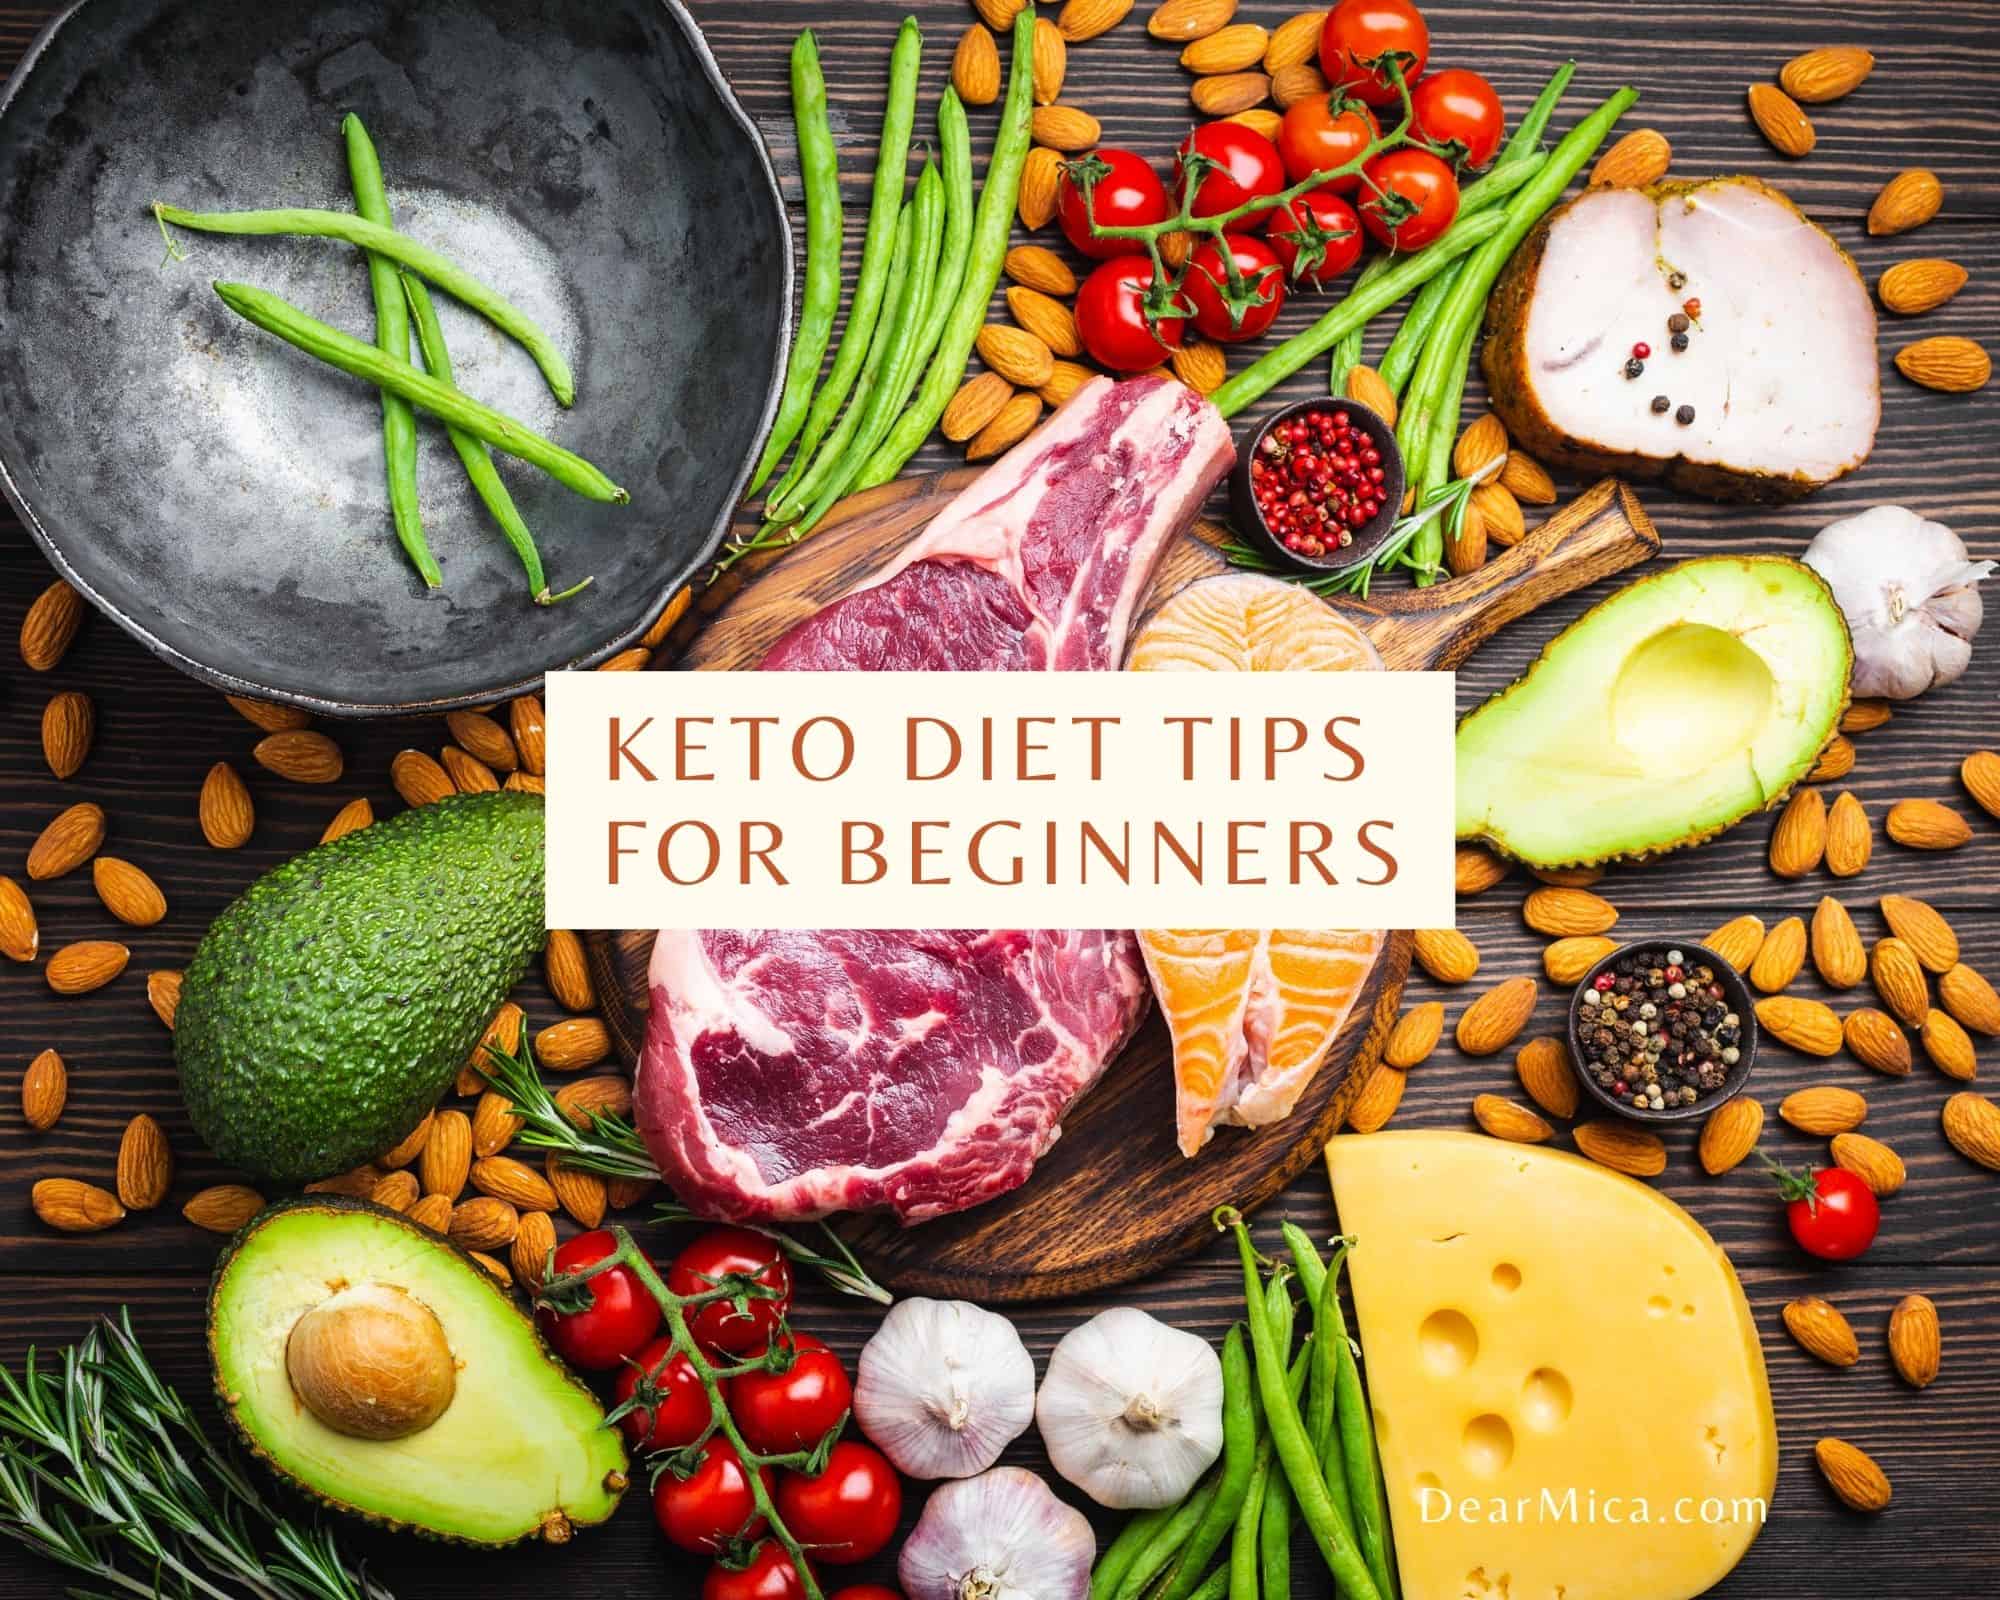 Keto foods such as steak, cheese, avocado salmon and vegetables with writing in the center, Keto diet tips for beginners